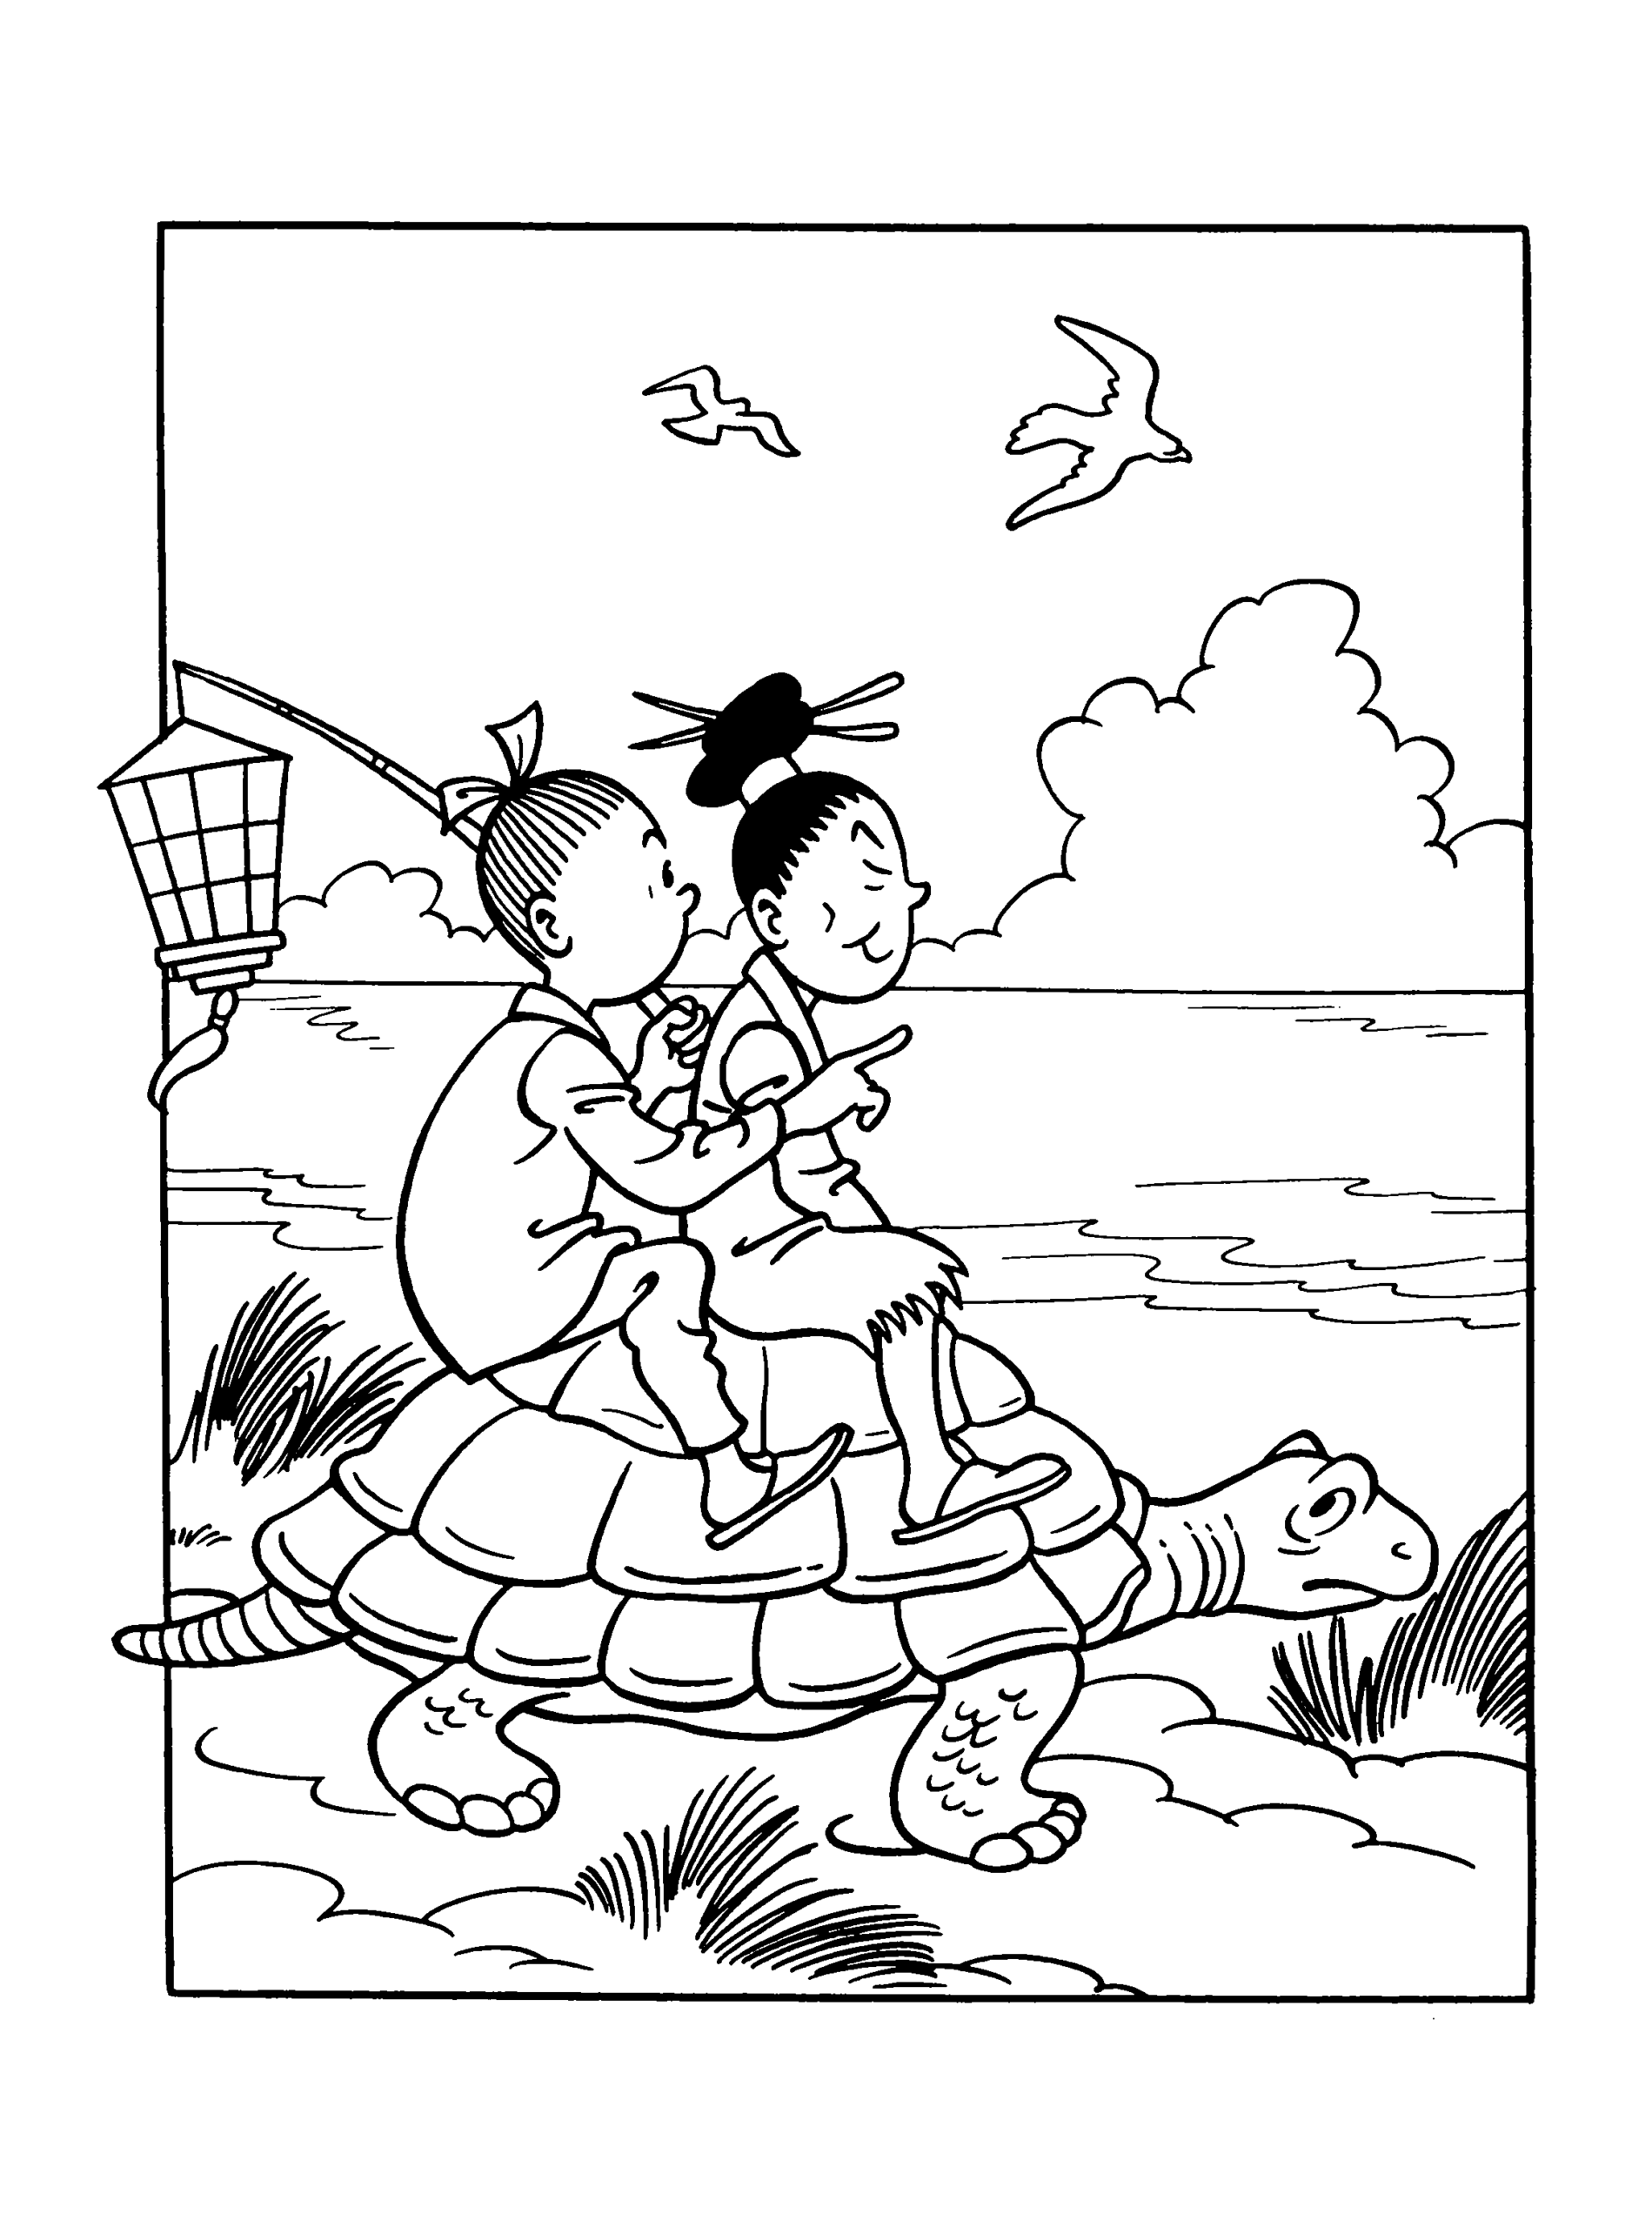 Spike and Suzy Coloring Pages Cartoons spike and suzy 41 Printable 2020 5928 Coloring4free